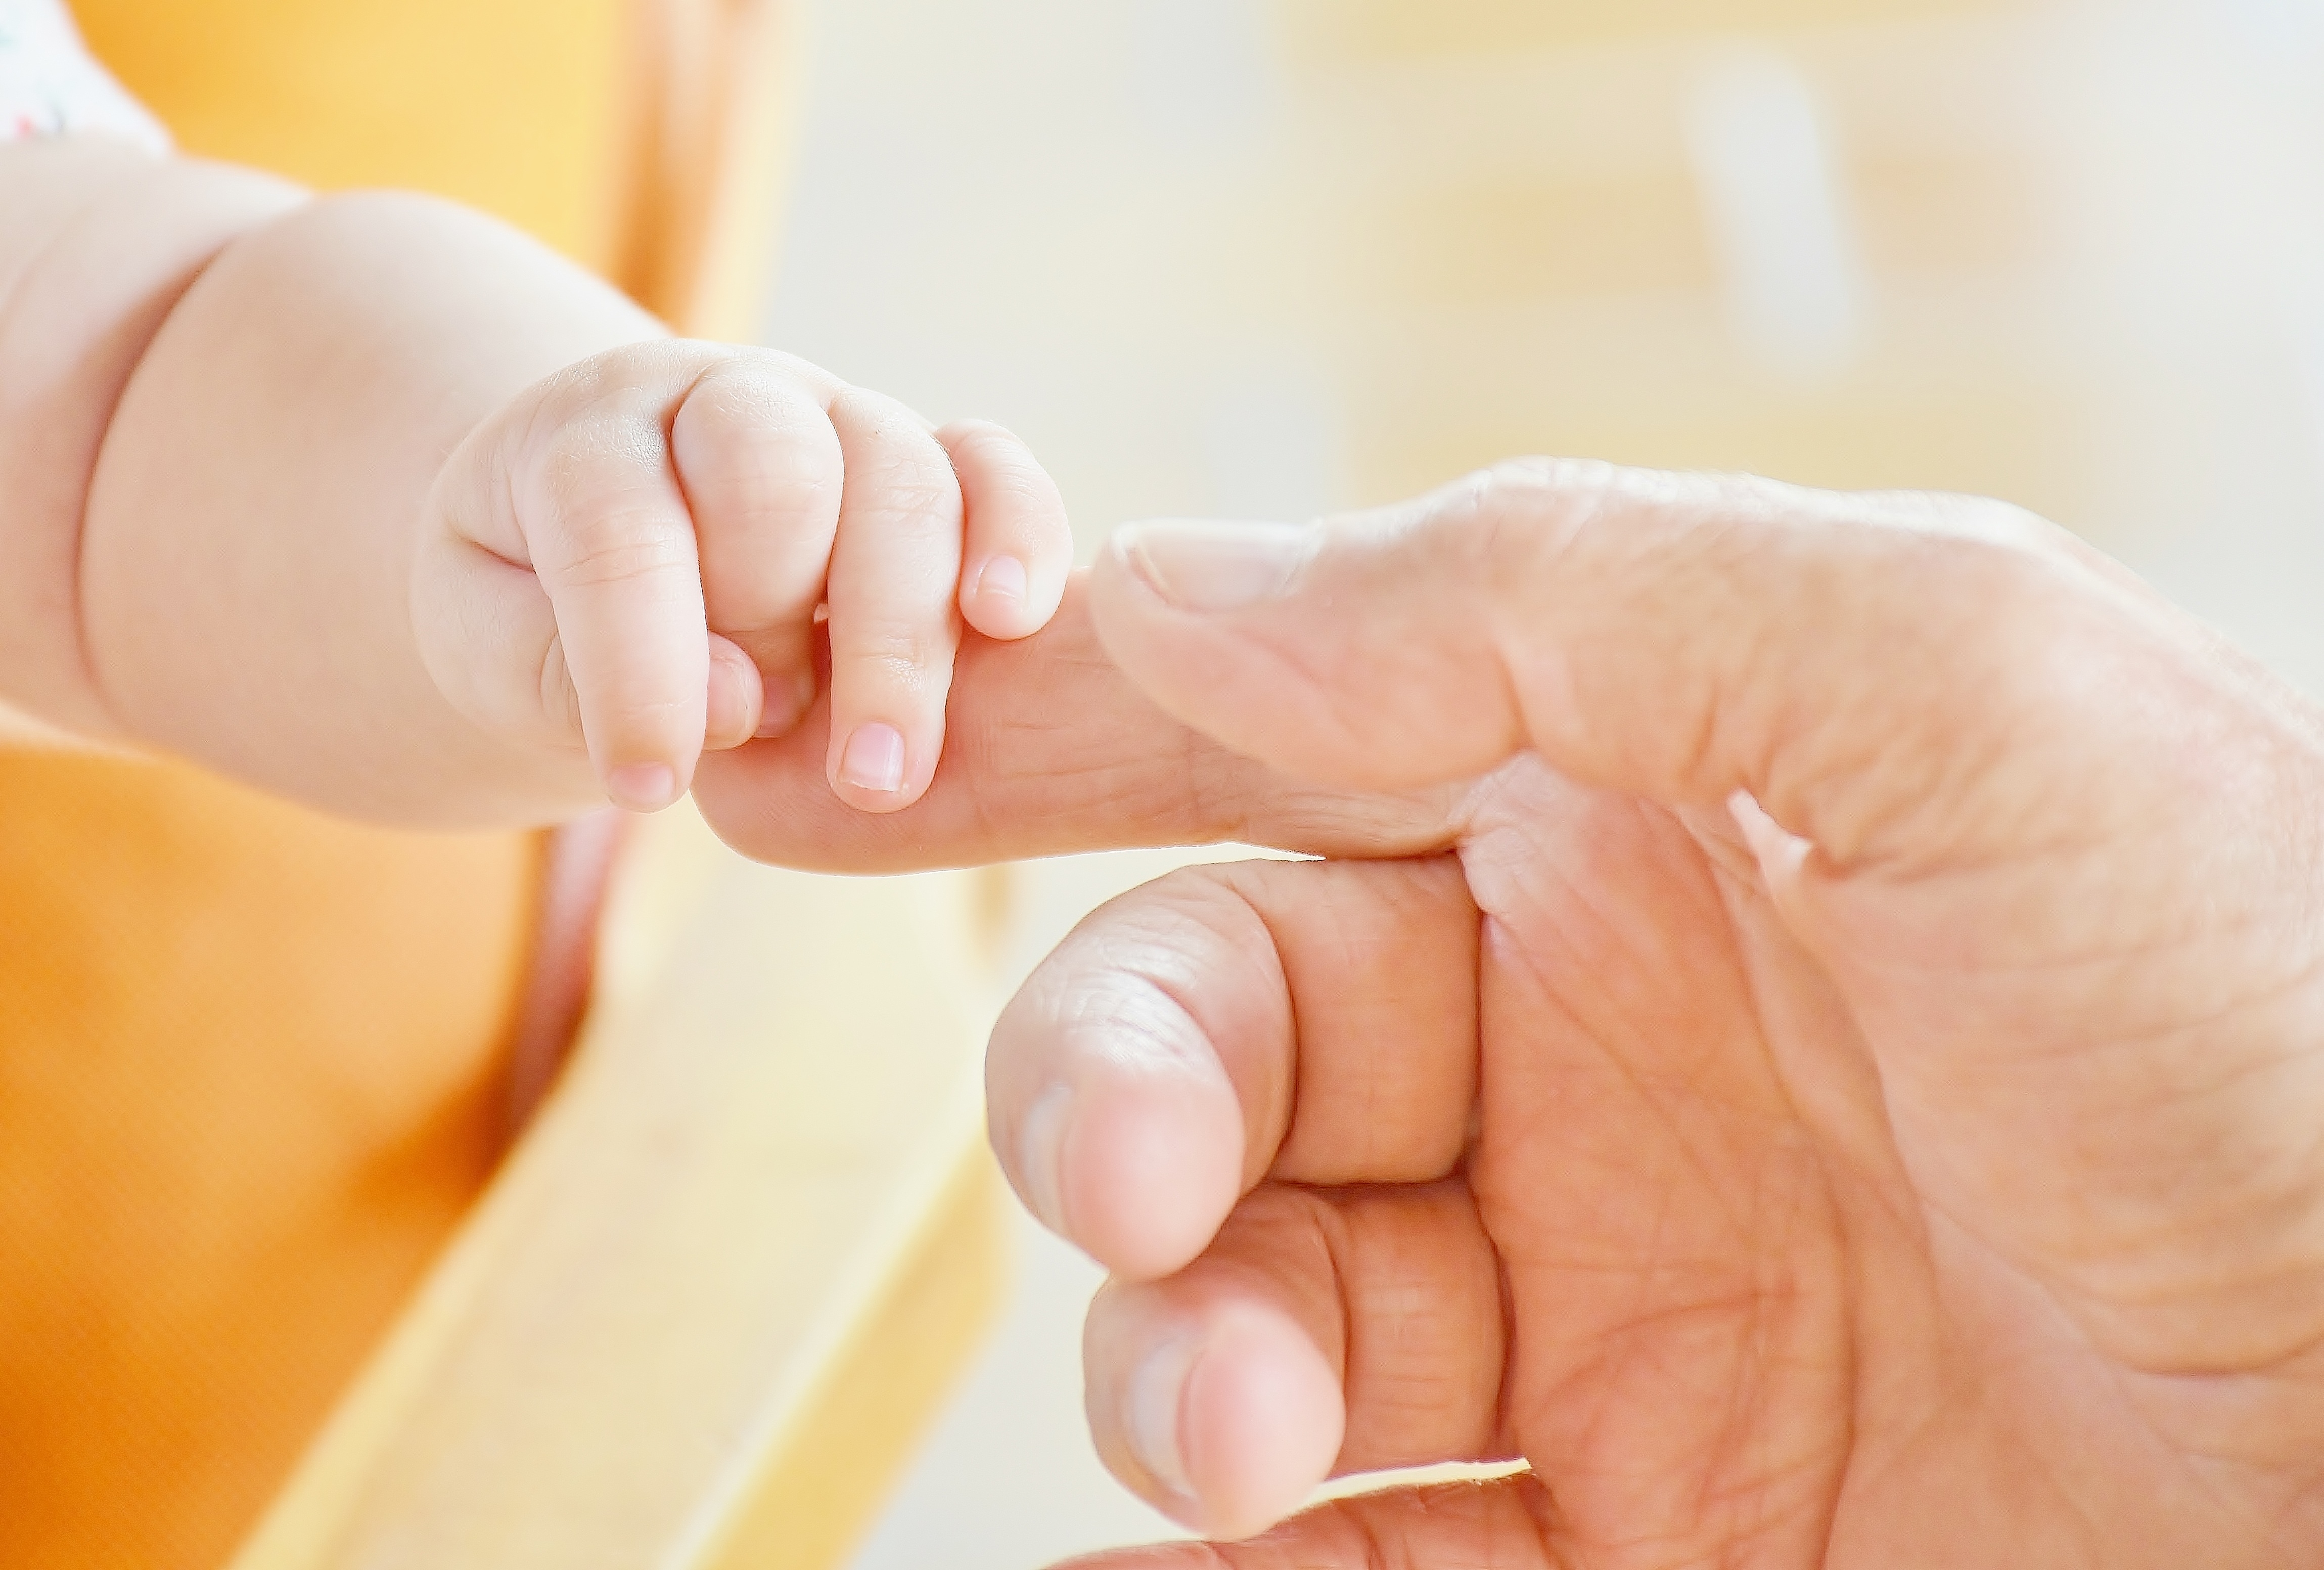 HD wallpaper, Infant, Hands Together, Baby Hands, Cute Baby, Happy Fathers Day, 5K, Holding Hands